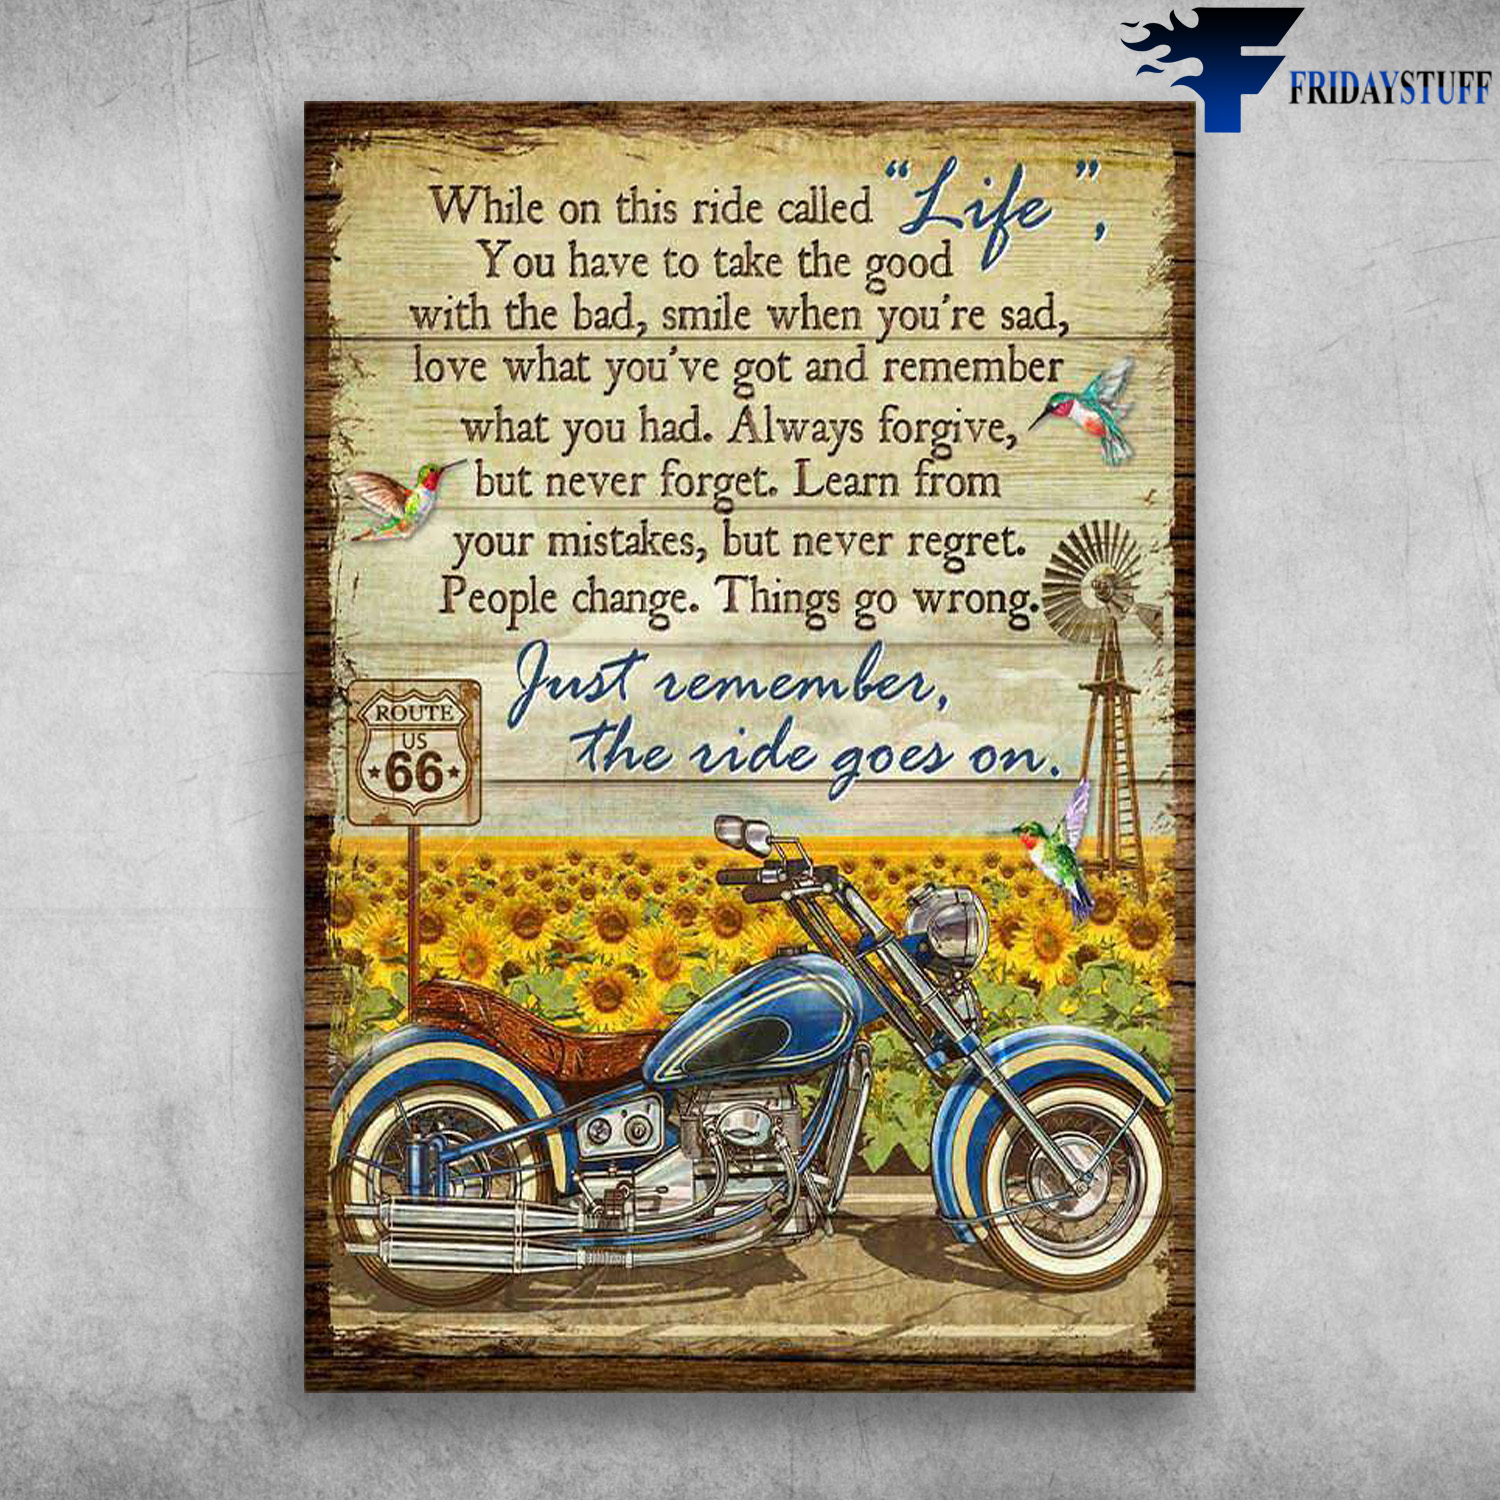 Motorcycle Lover, Humming Bird Sunflower - While On This Ride Called Life, You Have To Take The Good, With The Bad, Smile When You're Sad, Love What You've Got And Remember What You Had